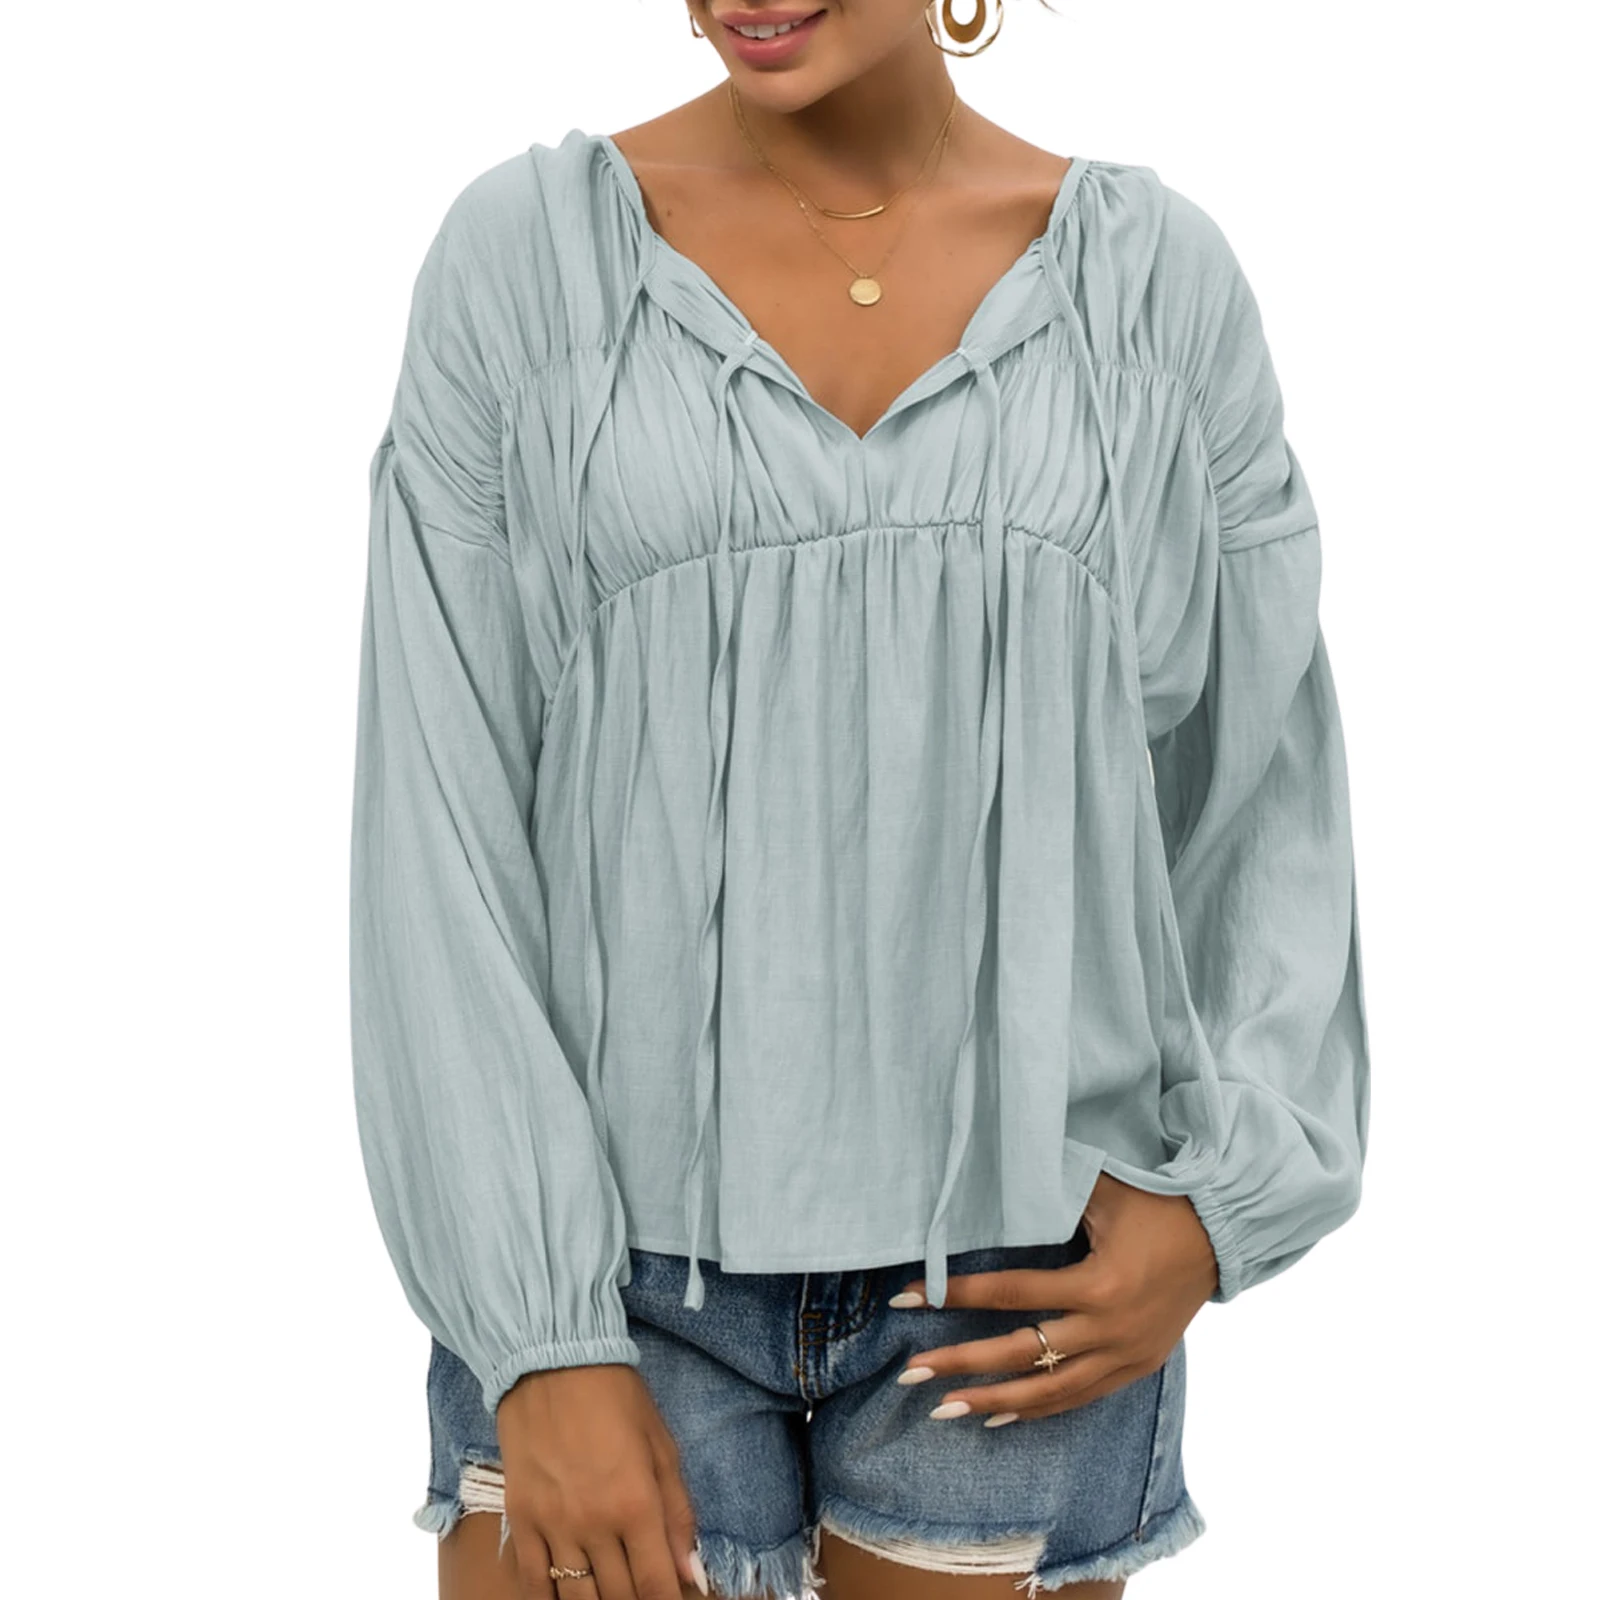 

Women Casual Blouse Tops Solid Color Tied V-Neck Long Puff Sleeves Ruffled Shirt for Ladies OL shirts